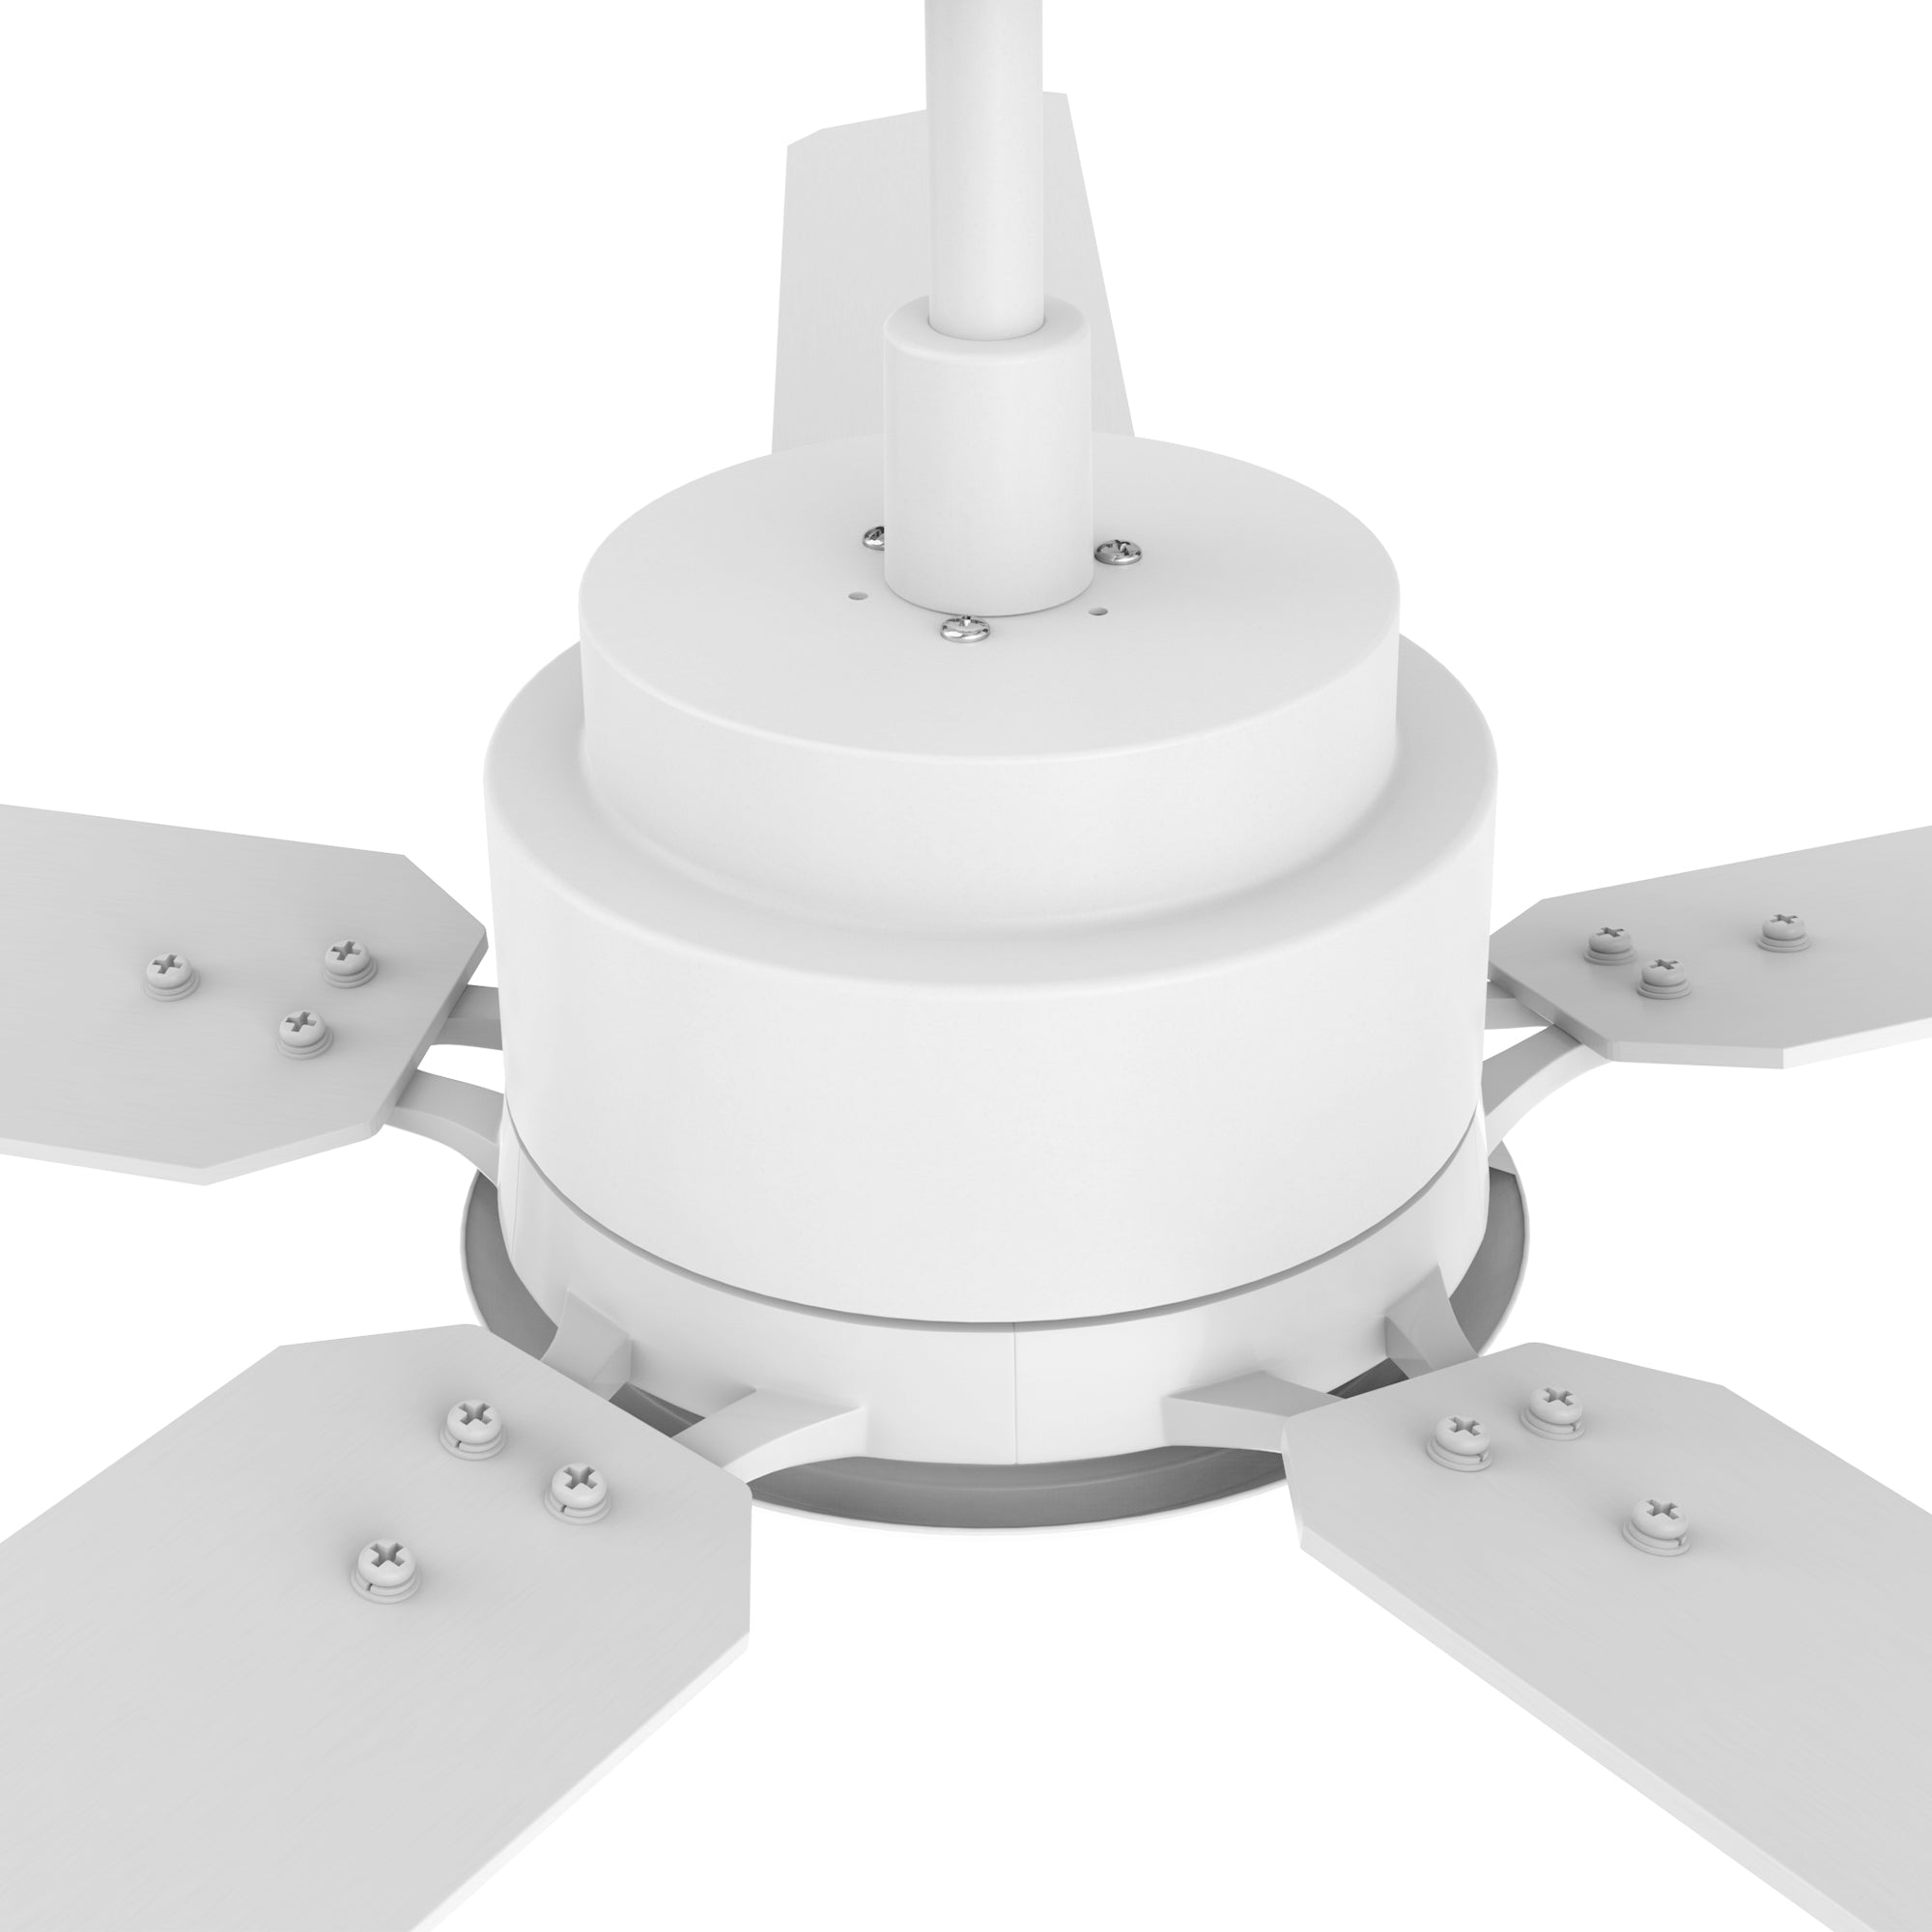 This Essex 56&#39;&#39; smart ceiling fan keeps your space cool, bright, and stylish. It is a soft modern masterpiece perfect for your large indoor living spaces. This Wifi smart ceiling fan is a simplicity designing with White finish, use elegant Plywood blades and has an integrated 4000K LED cool light. The fan features Remote control, Wi-Fi apps, Siri Shortcut and Voice control technology (compatible with Amazon Alexa and Google Home Assistant ) to set fan preferences.